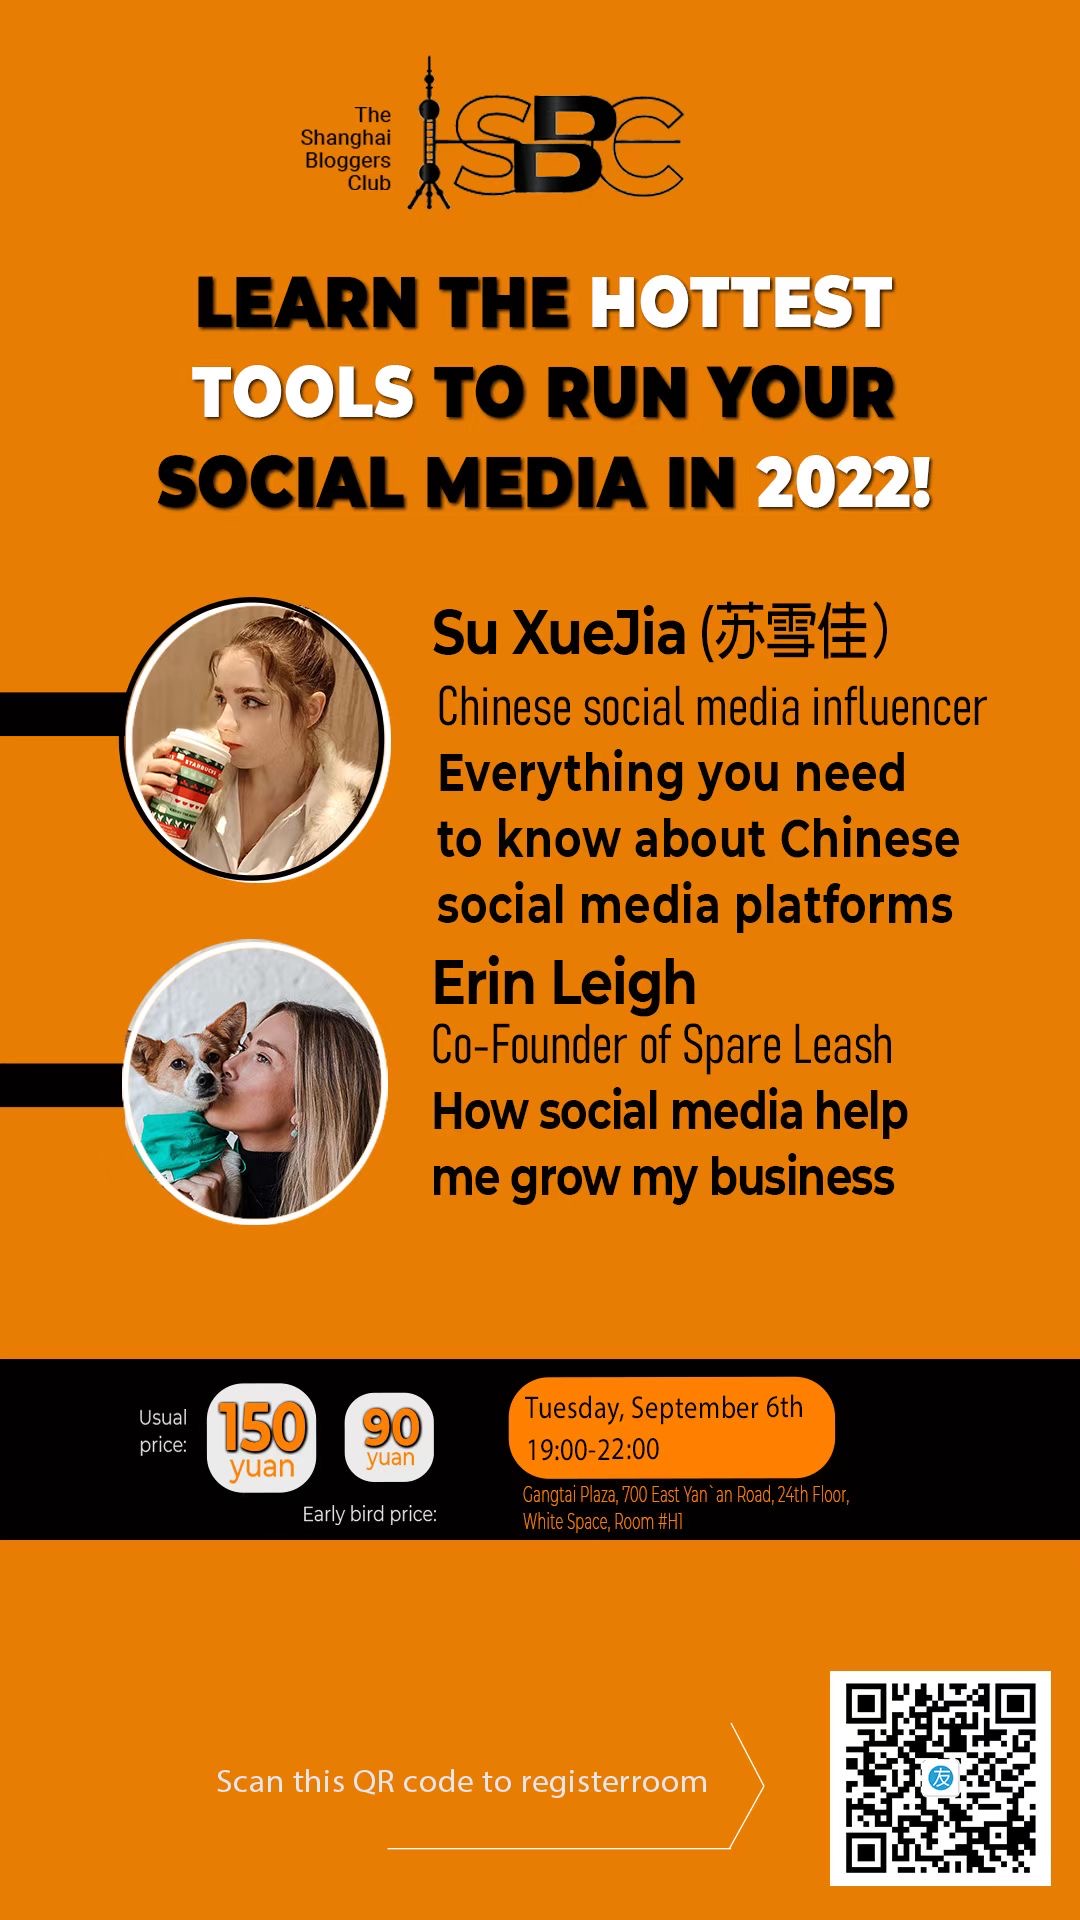 Learn the hottest tools to run your social media in 2022